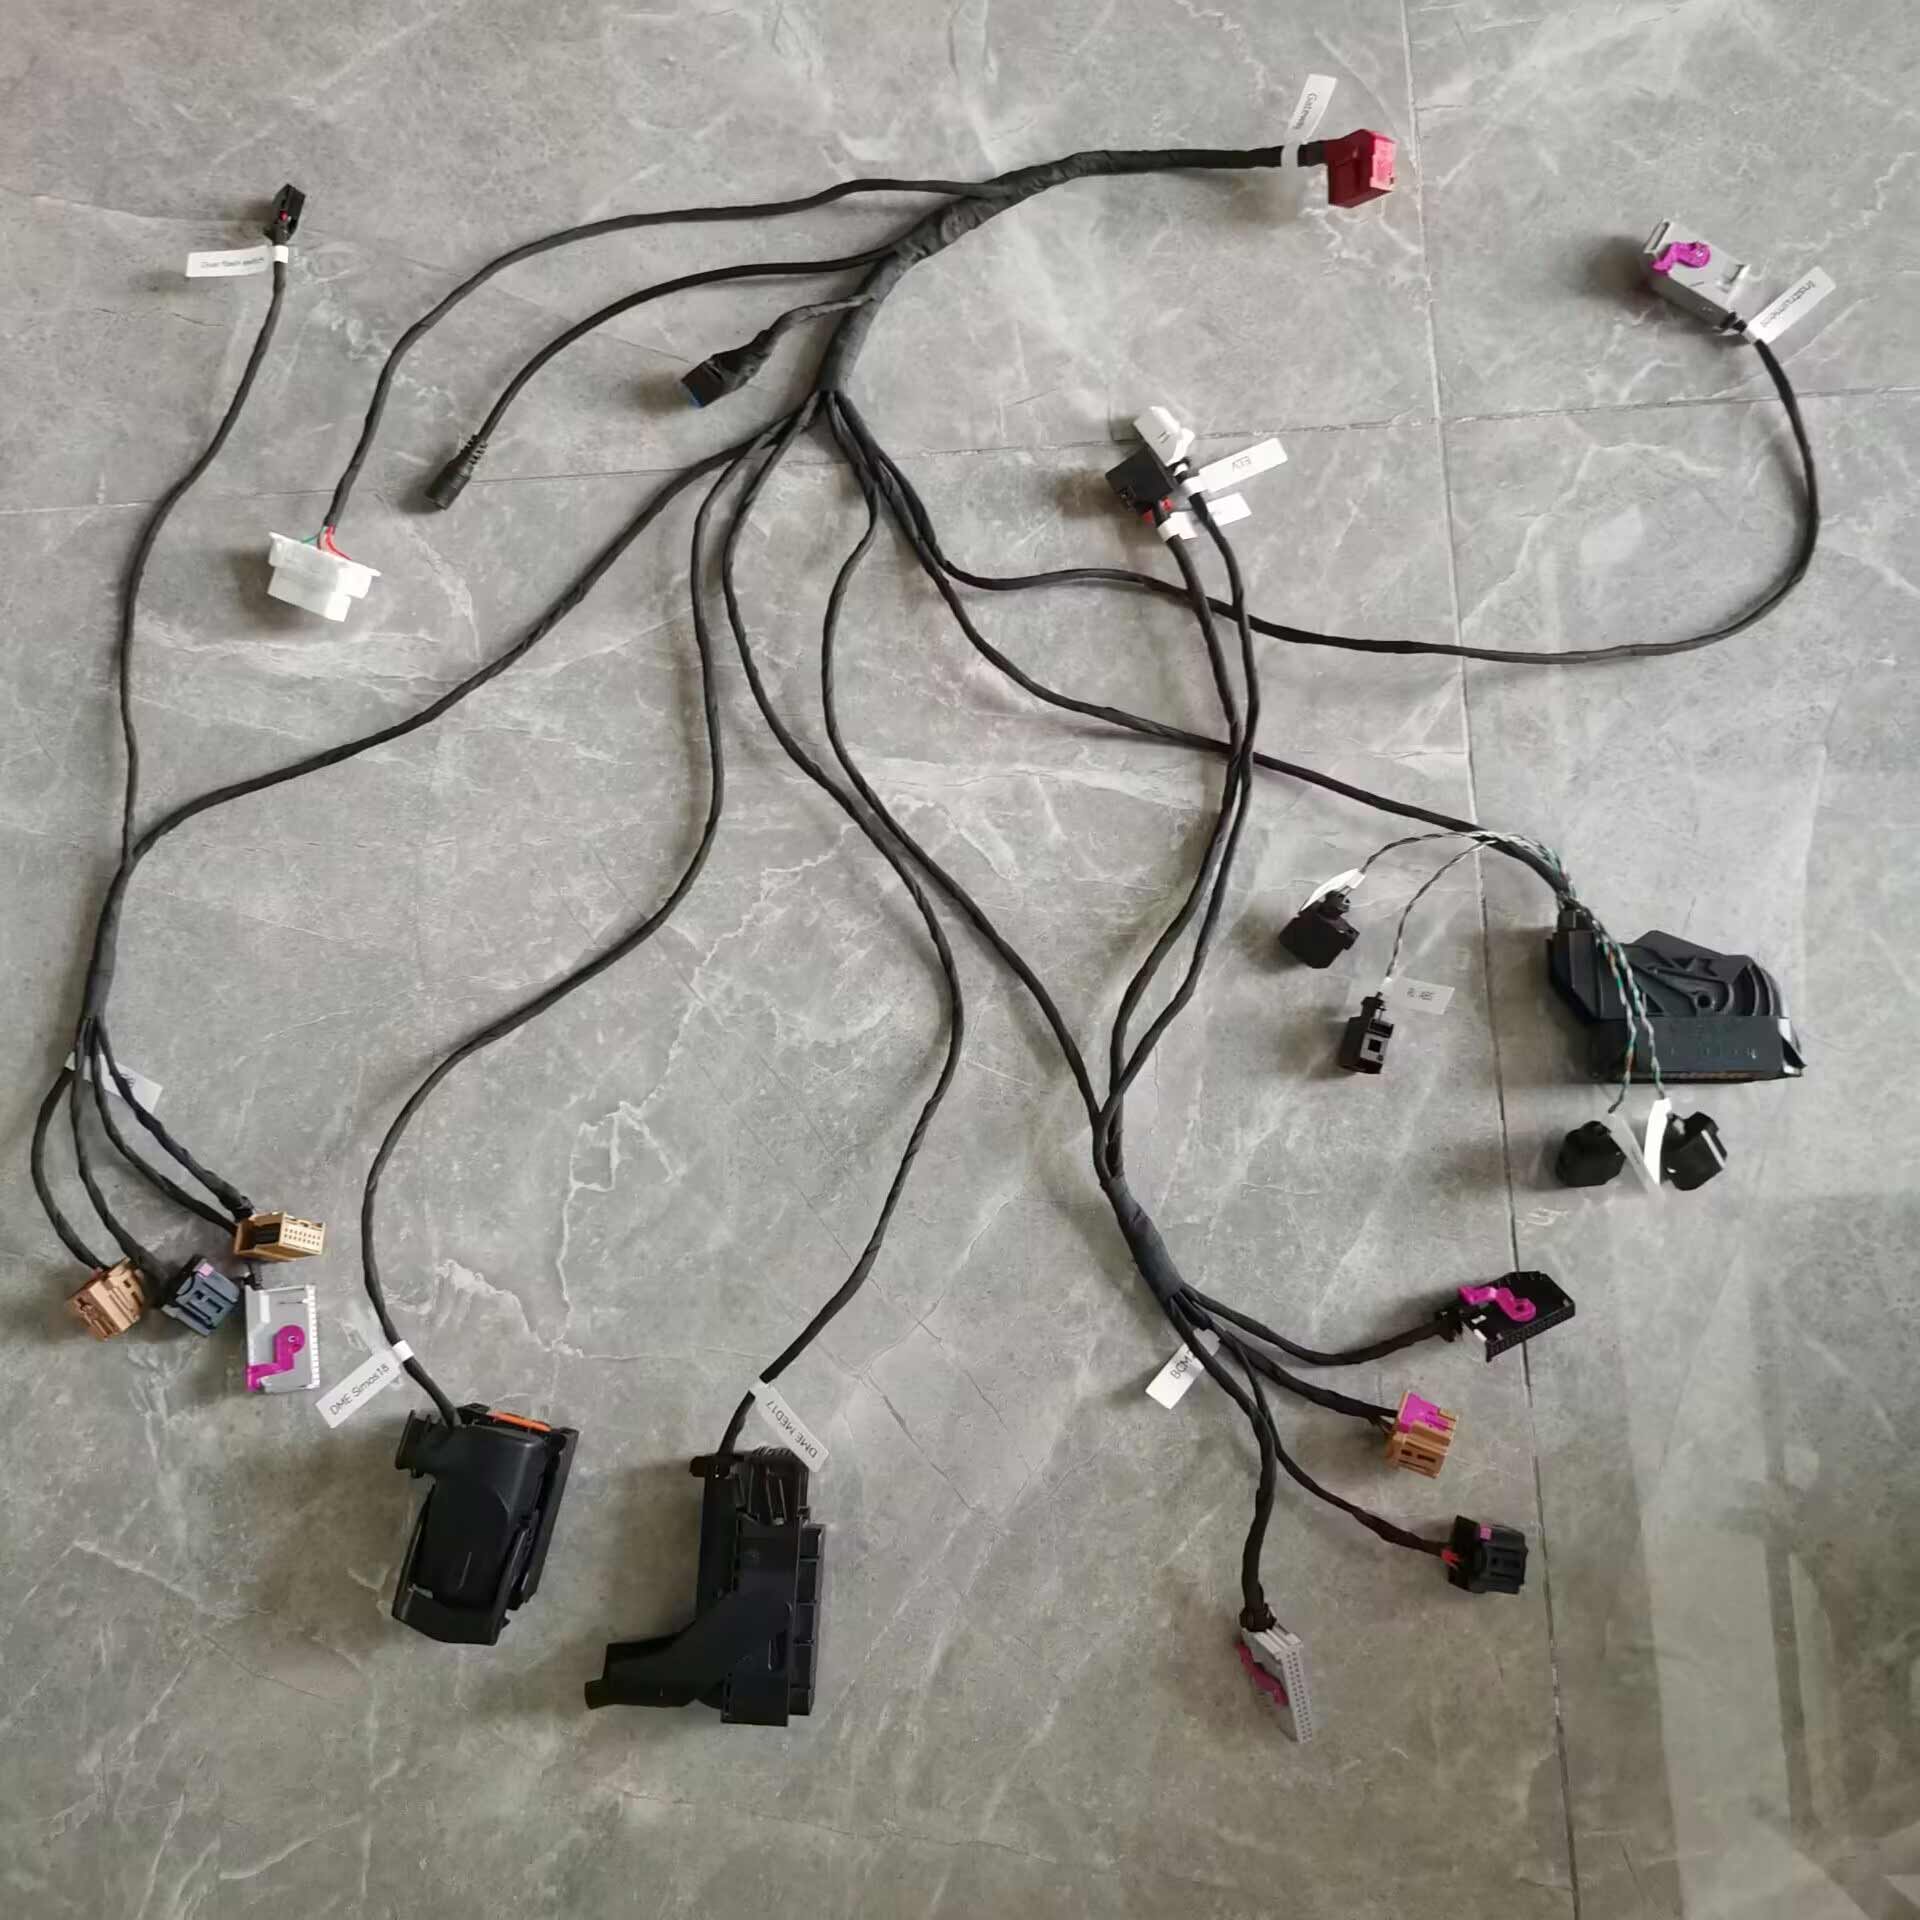 Full Testing Platform Harness  for 5th Generation Immo Audi A4 A5 A6 A8 Q5 Q7 - Support ELV DME Gateway ABS BCM1 BCM2 Hazard Light  Combination instrument